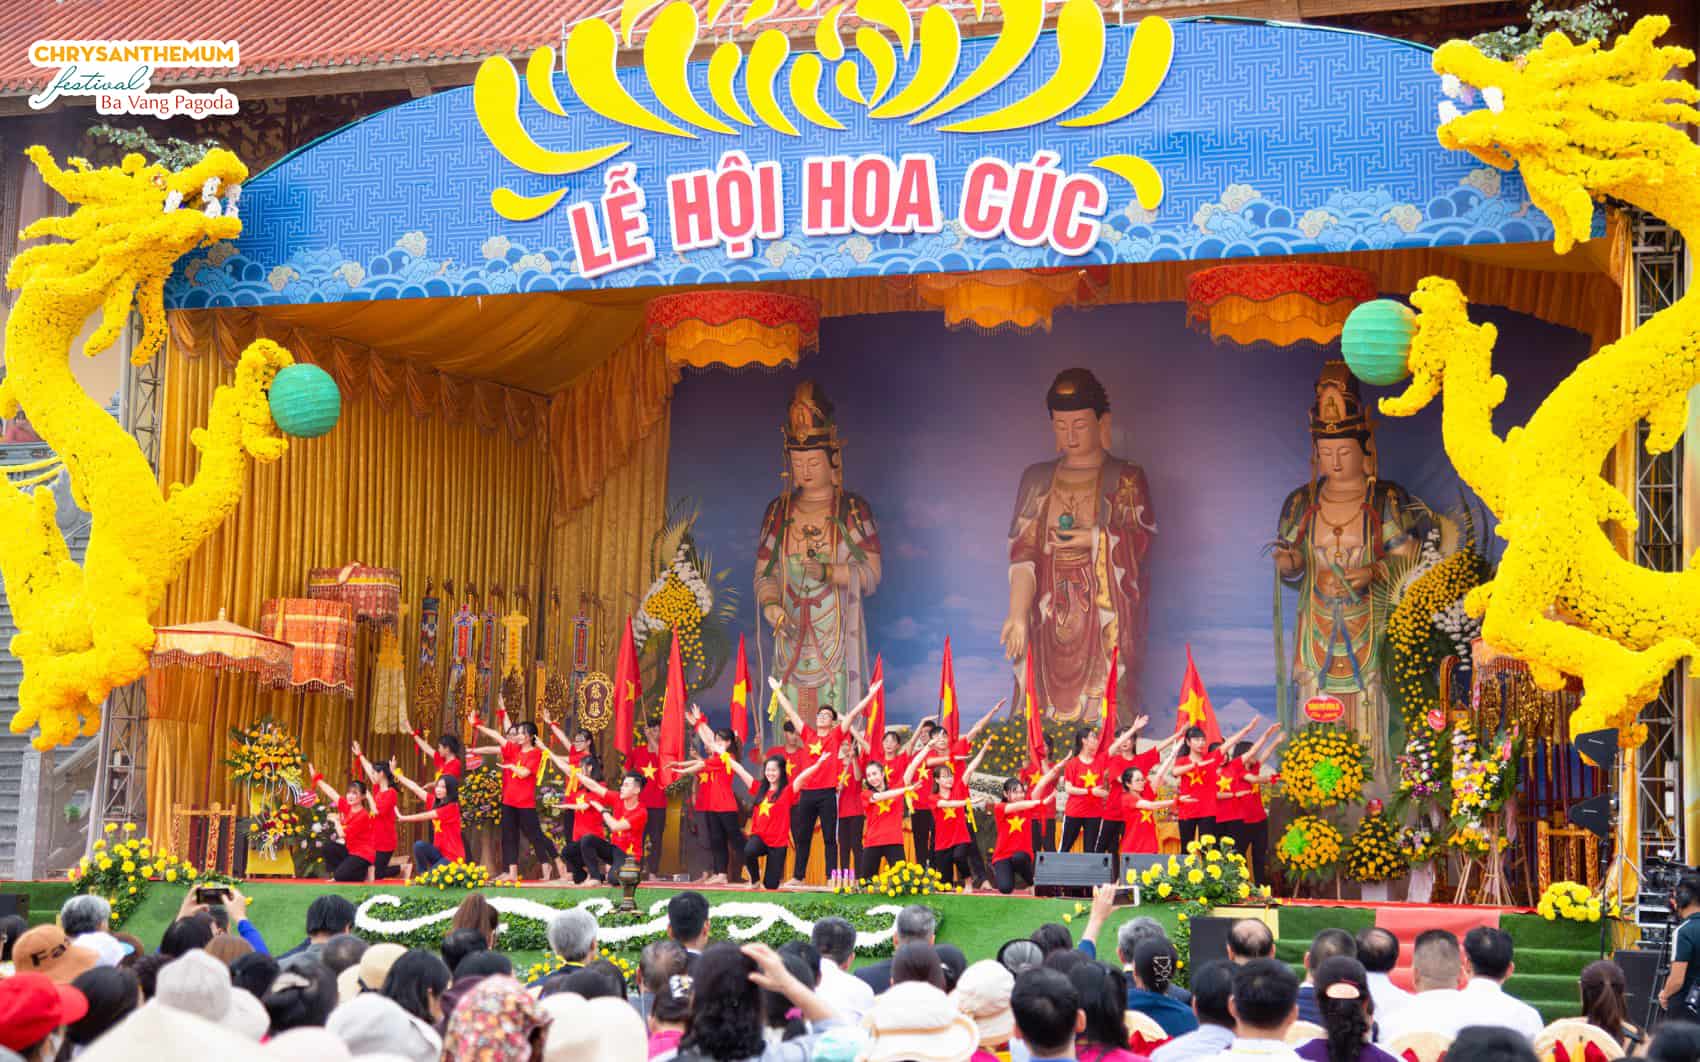 Performances at the Opening ceremony of Chrysanthemum Festival 2020 at Ba Vang Pagoda